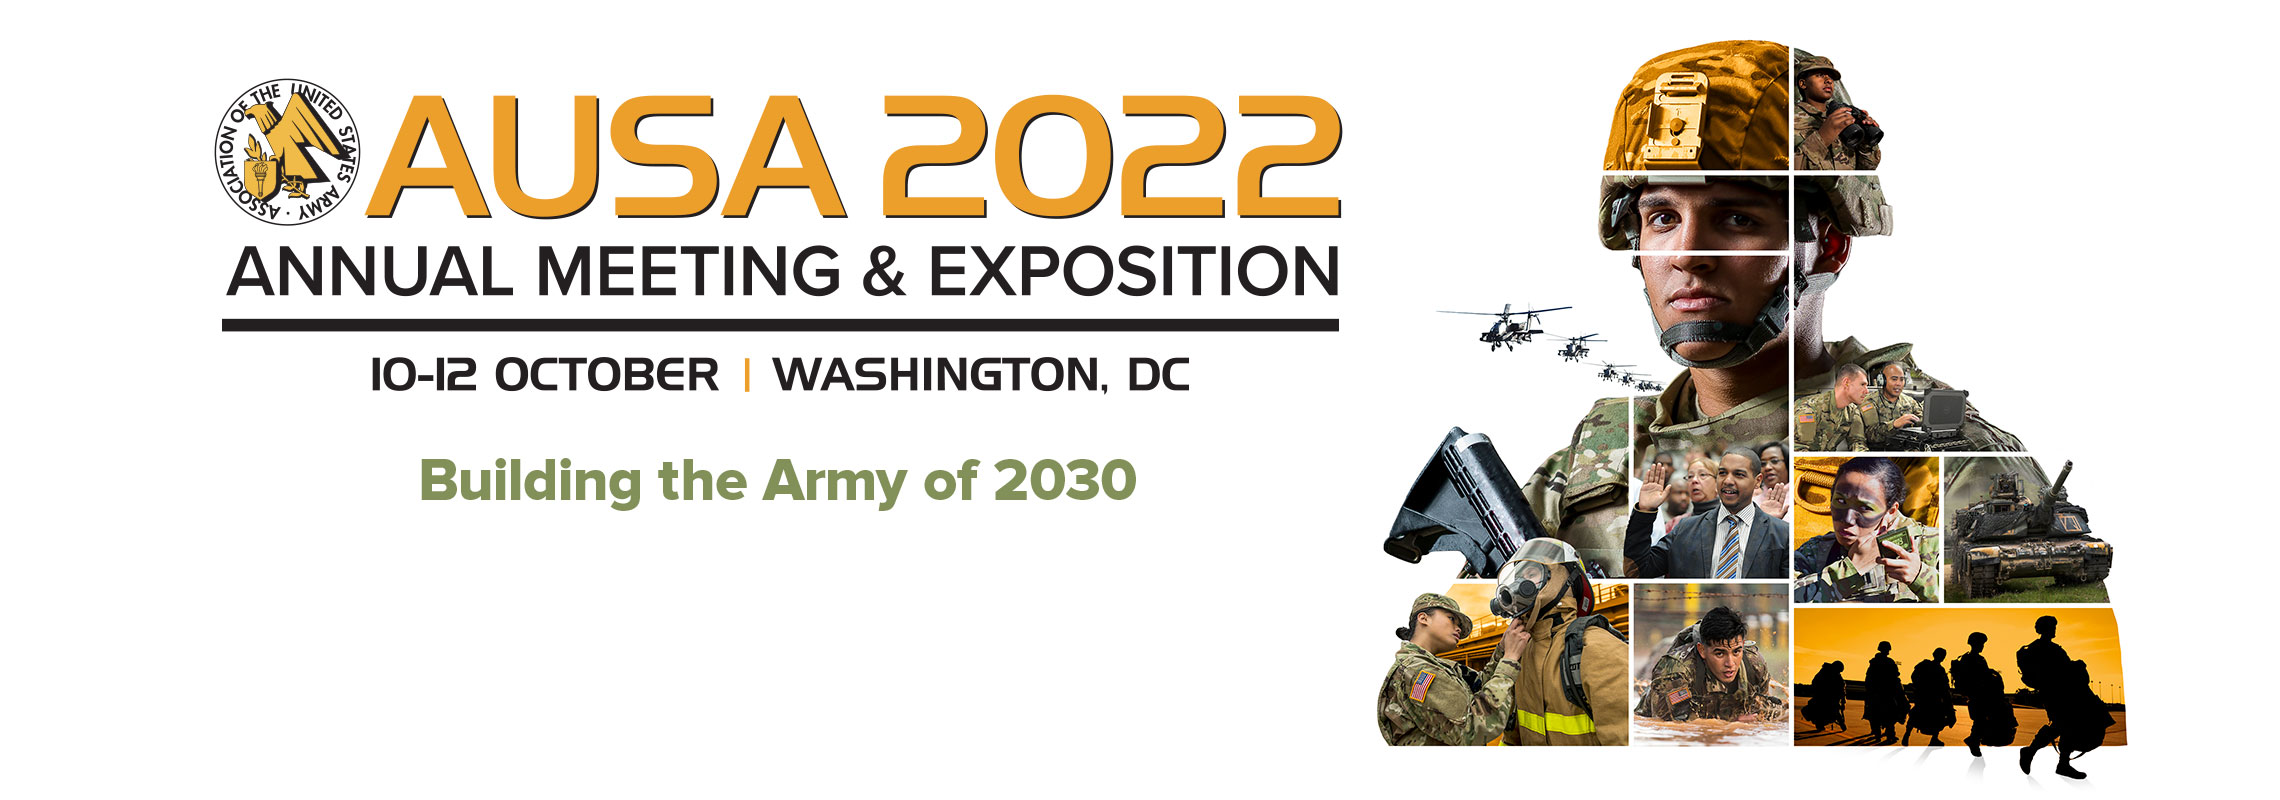 AUSA Conference